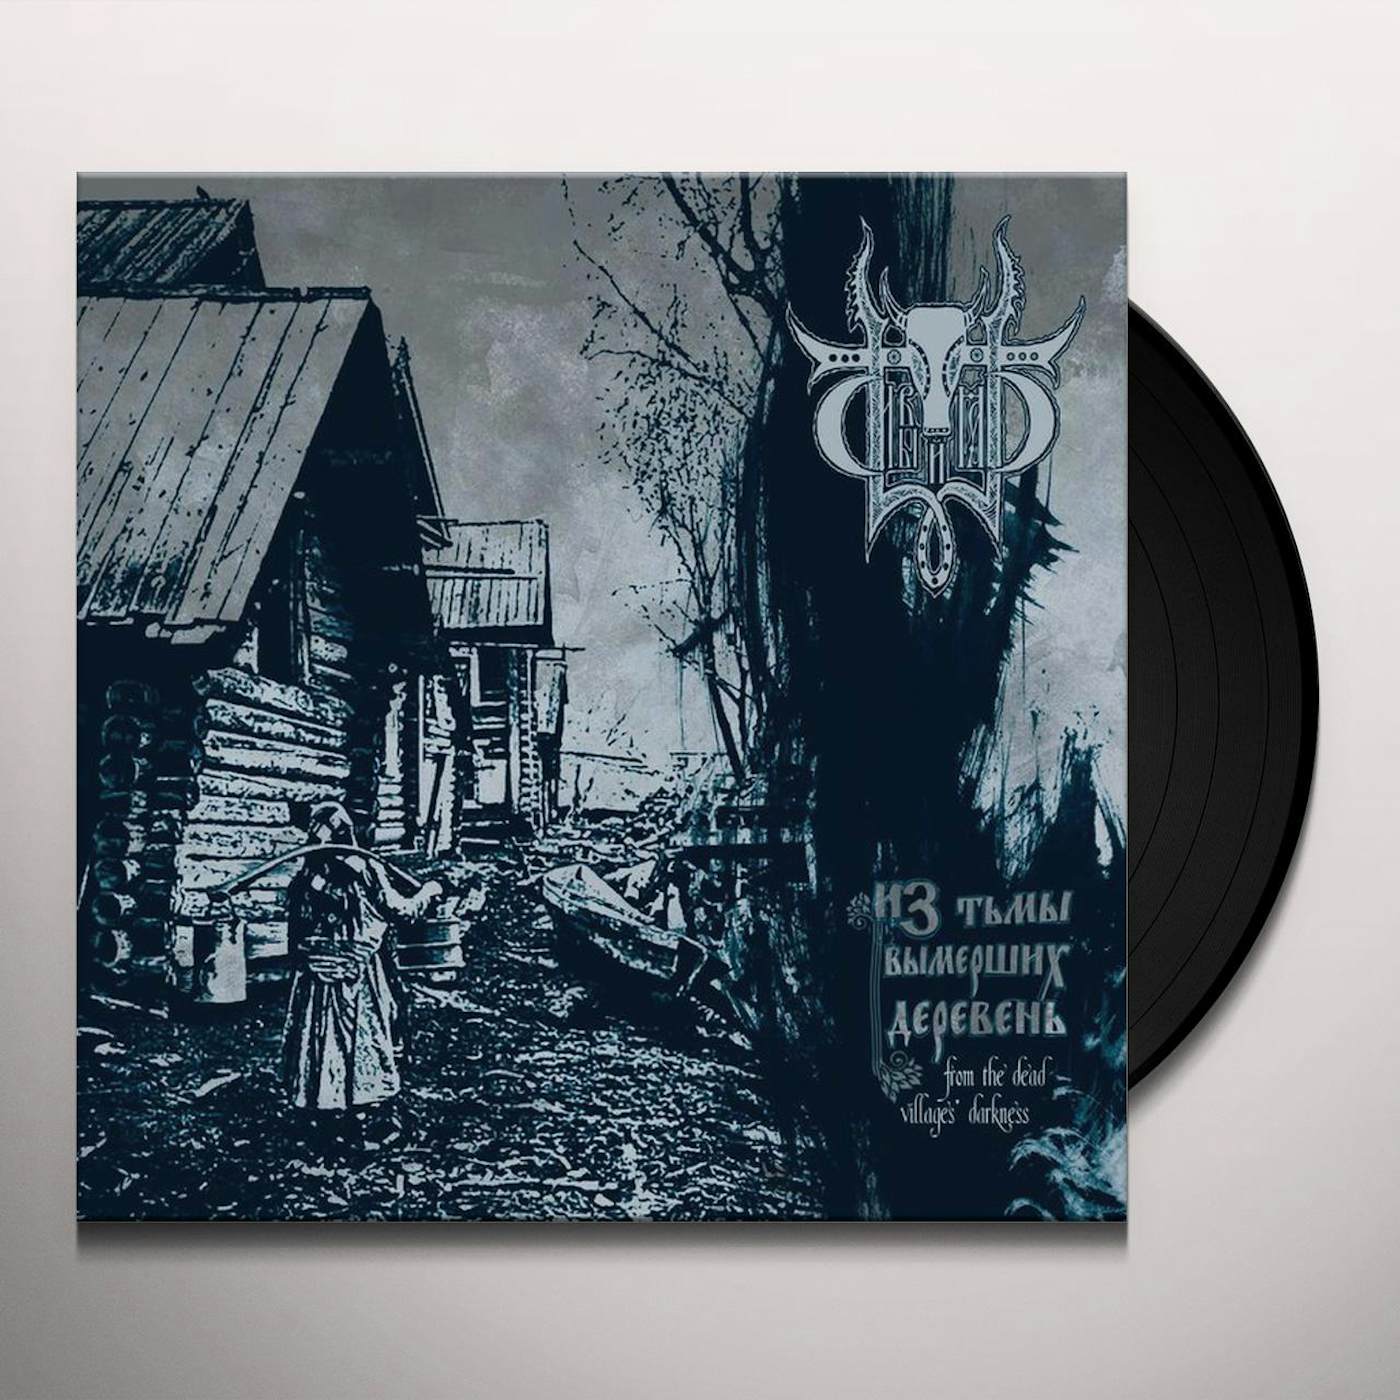 Sivyj Yar FROM THE DEAD VILLAGES DARKNESS Vinyl Record